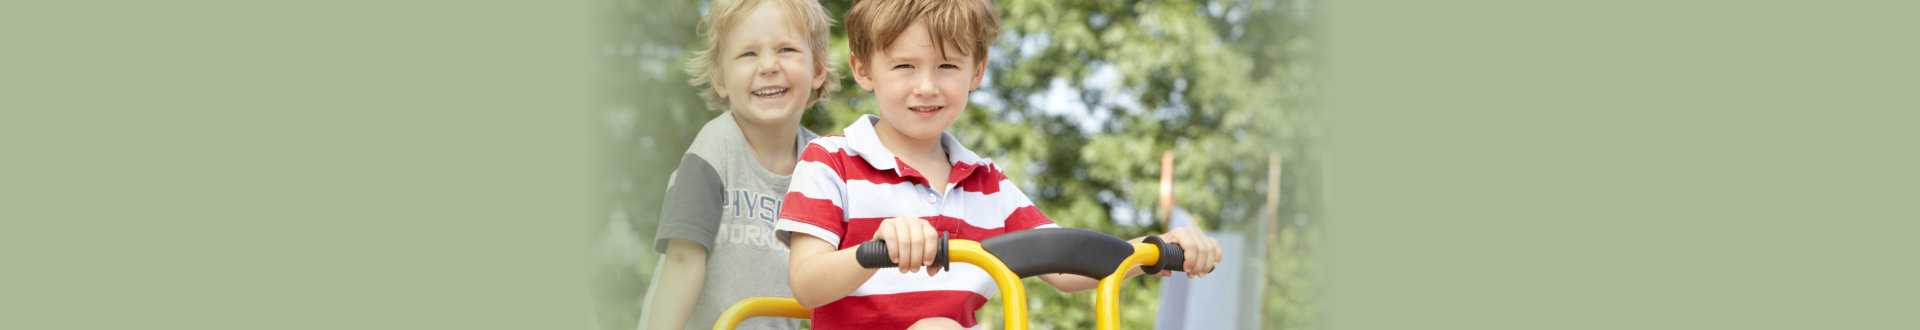 two boys riding a tricycle